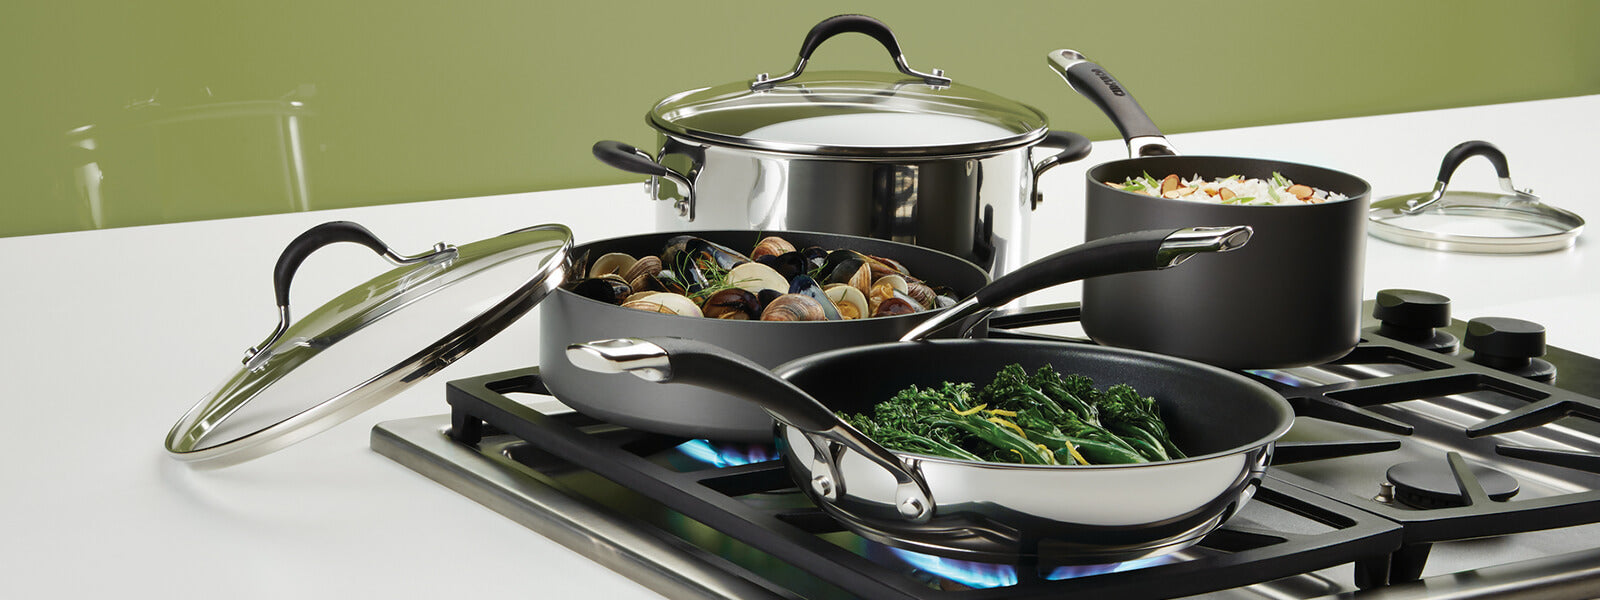 Steel Kadai For Cooking: Versatile Cookware For Indian Meals - PotsandPans  India